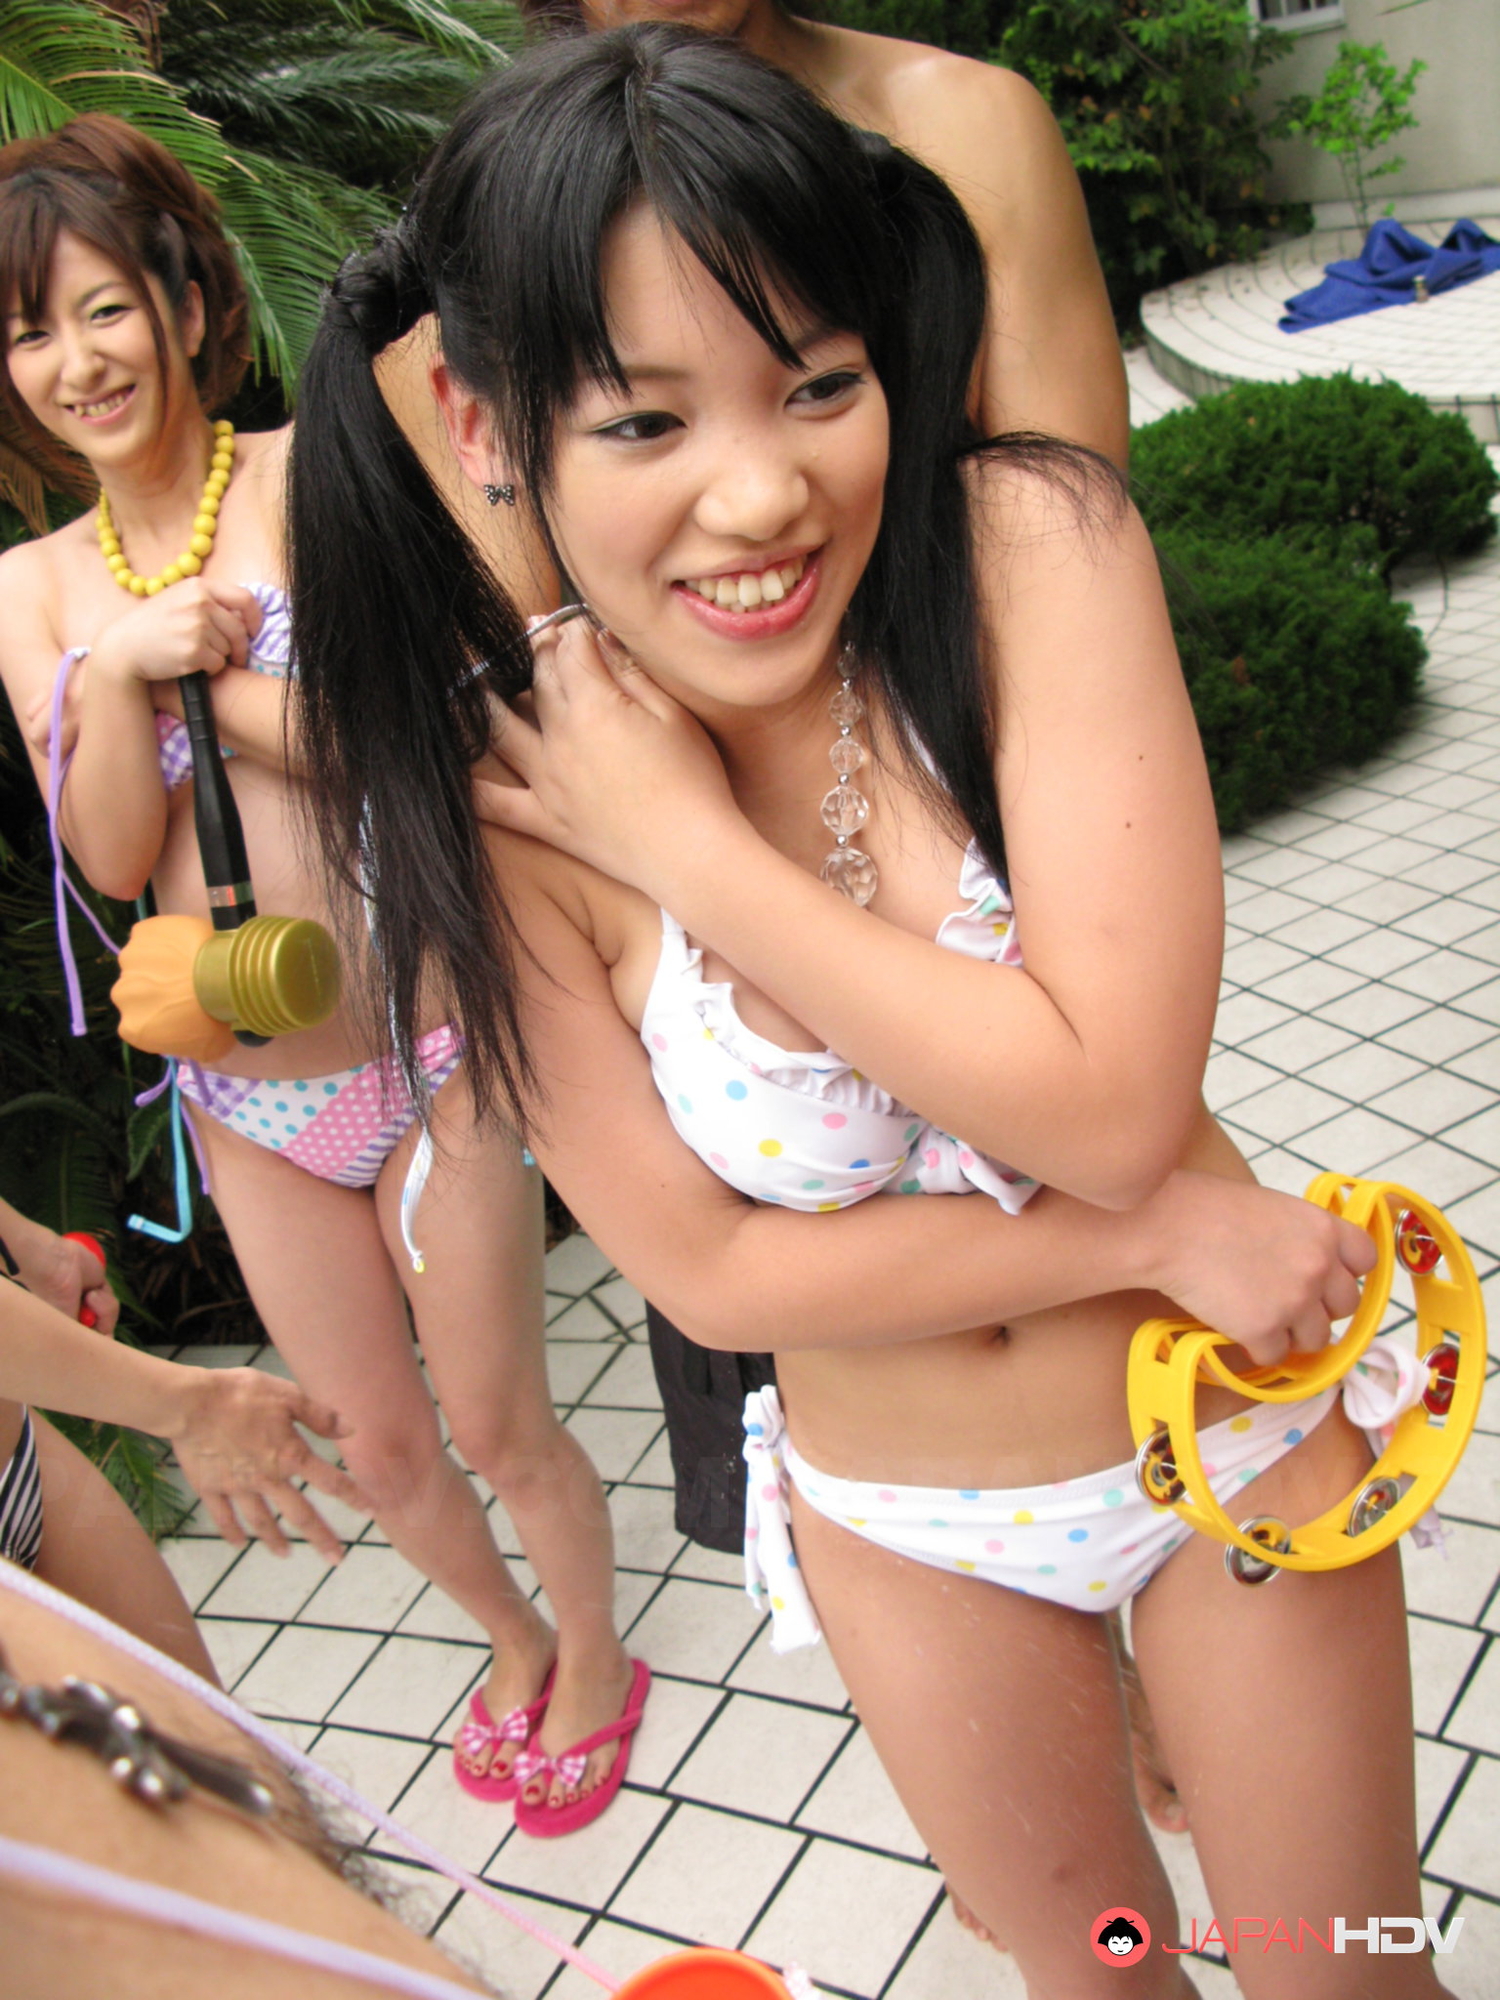 Japanese Nudist Party - Really sexy Japanese pool party